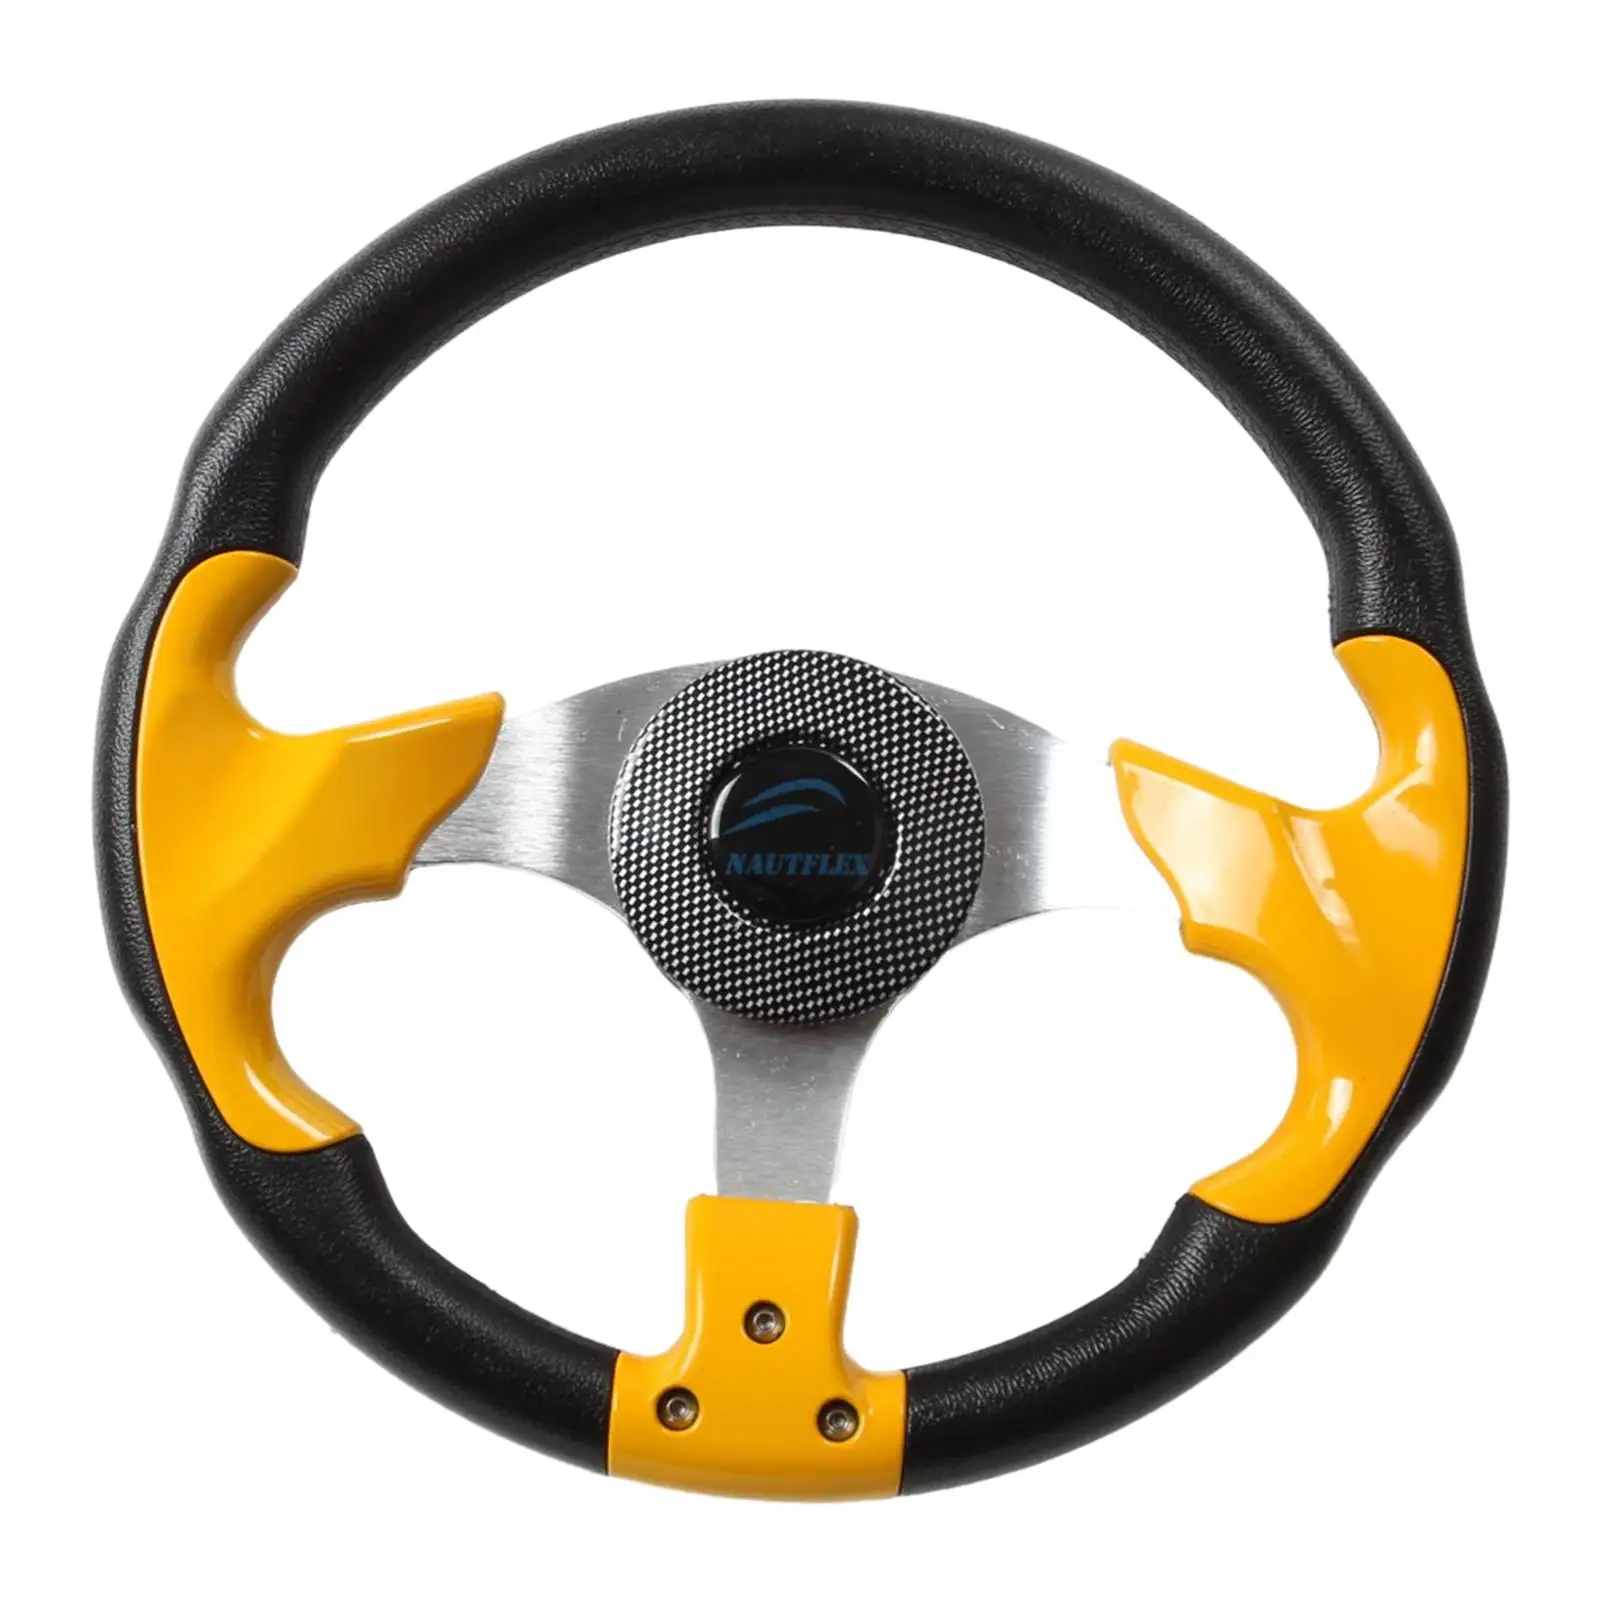 

Boat Steering Wheel Replacement 3/4" Tapered Shaft 3 Spoke Yellow Non directional for Boat Accessories Marine Vessels Yacht